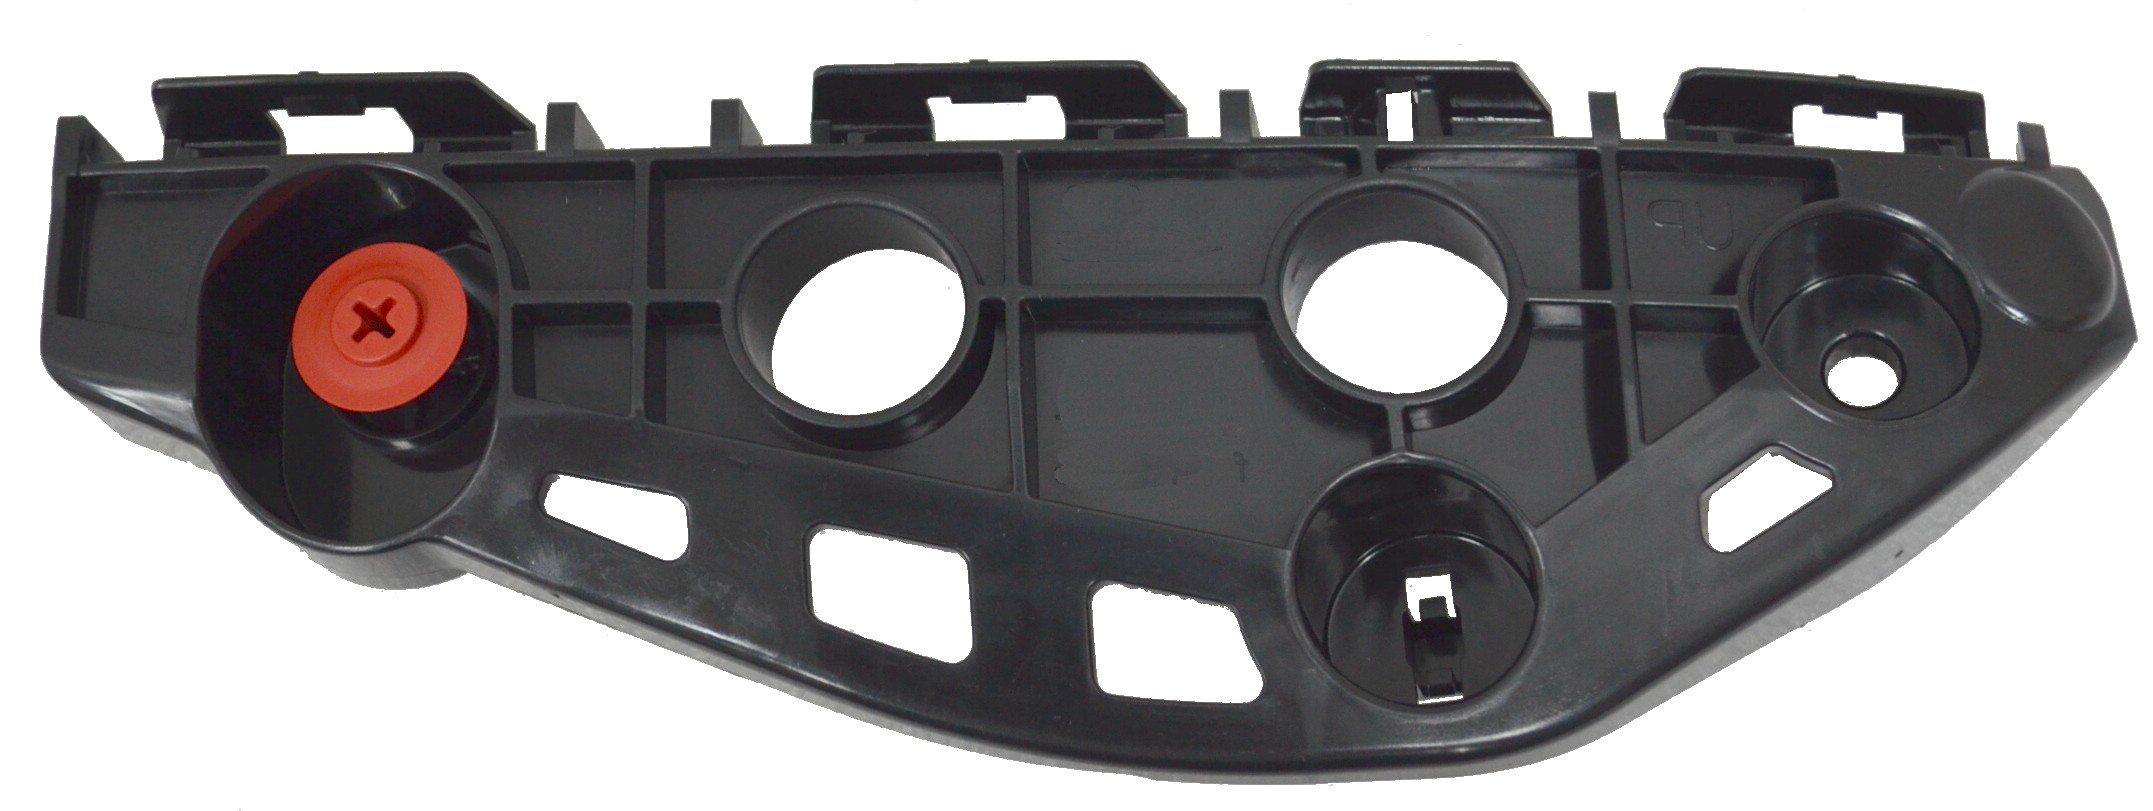 Aftermarket BRACKETS for LEXUS - RX350, RX350,13-15,RT Front bumper cover retainer